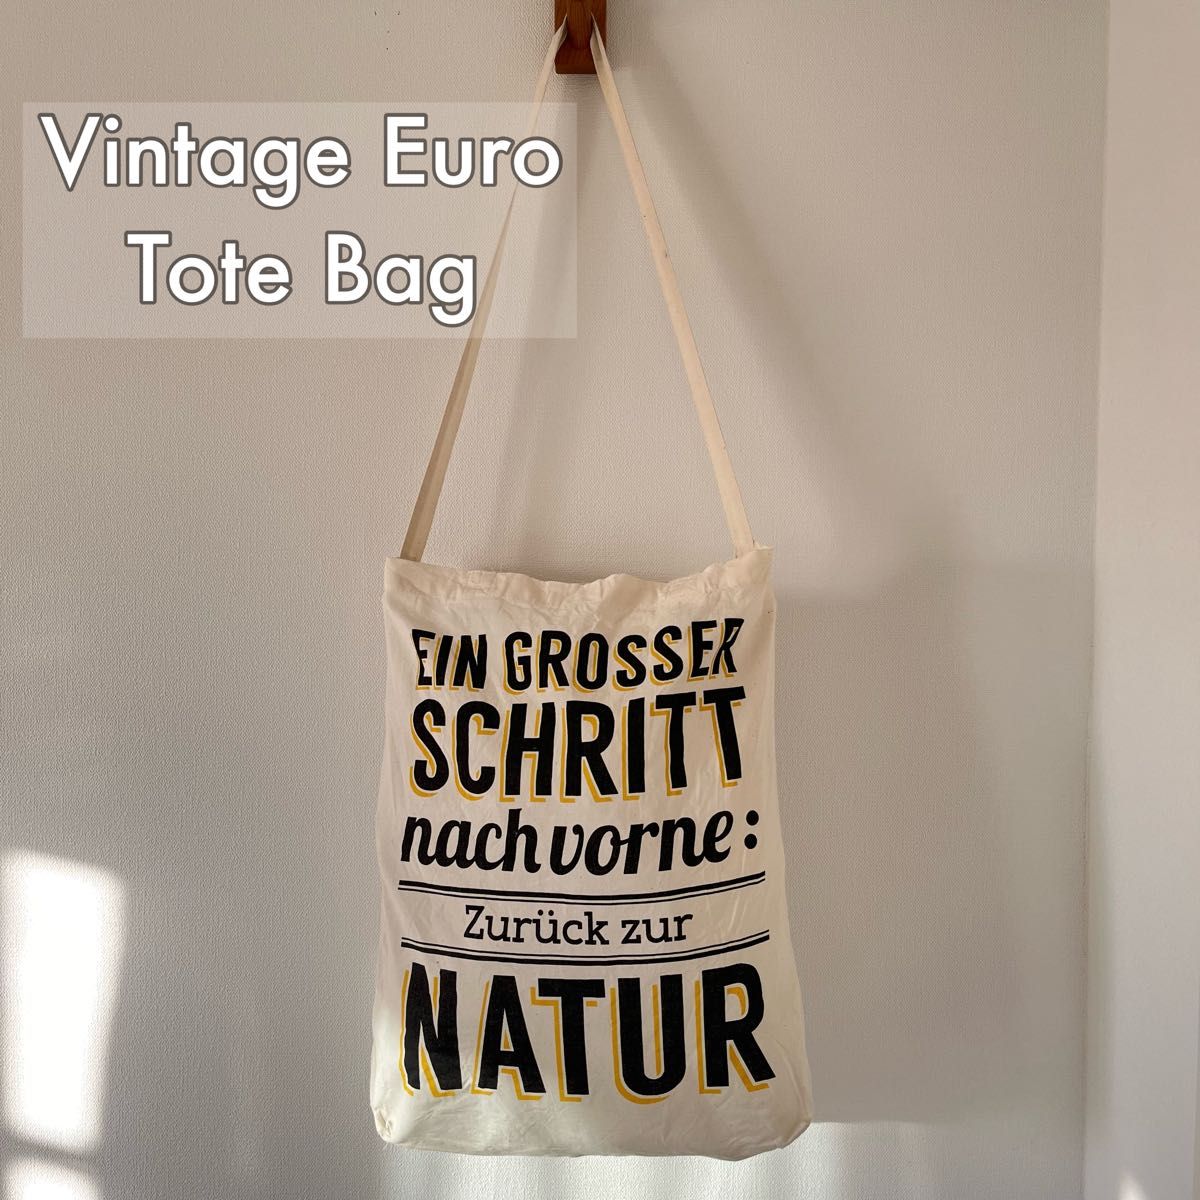 【NATUR GUT】Vintage Euro Toto bag ユーロトートバッグ  エコバッグ used 古着 企業ロゴ